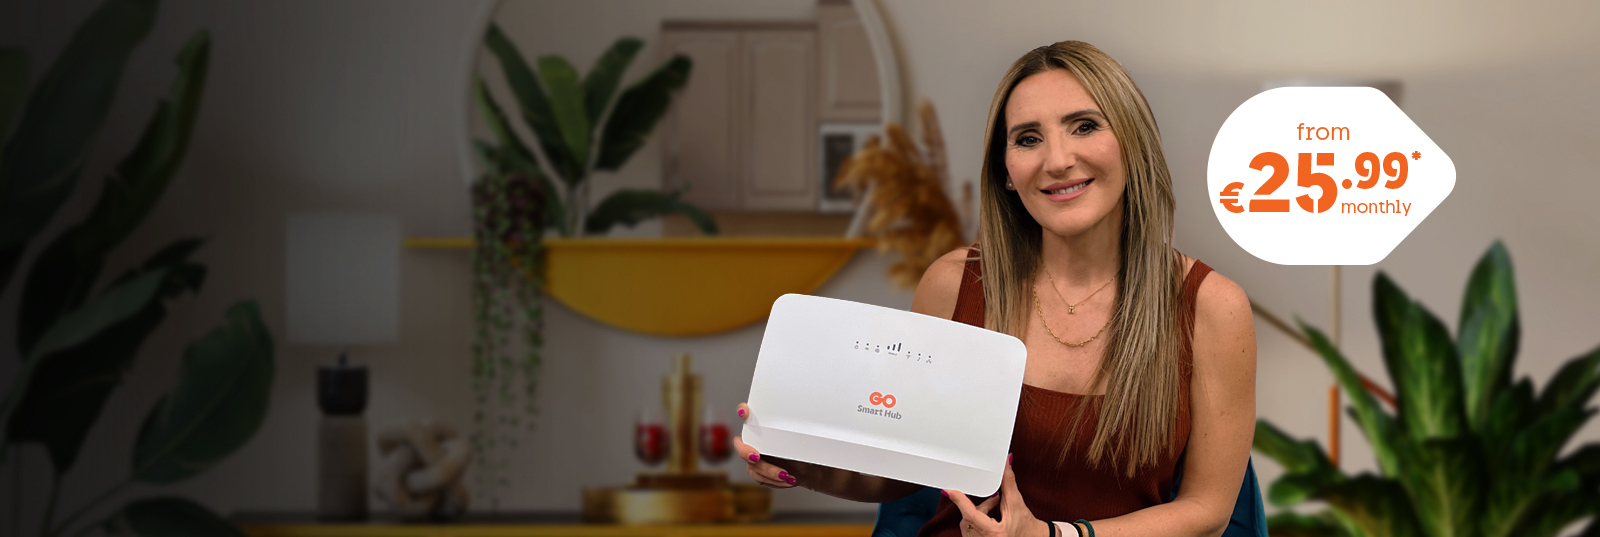 Woman smiling holding an internet device